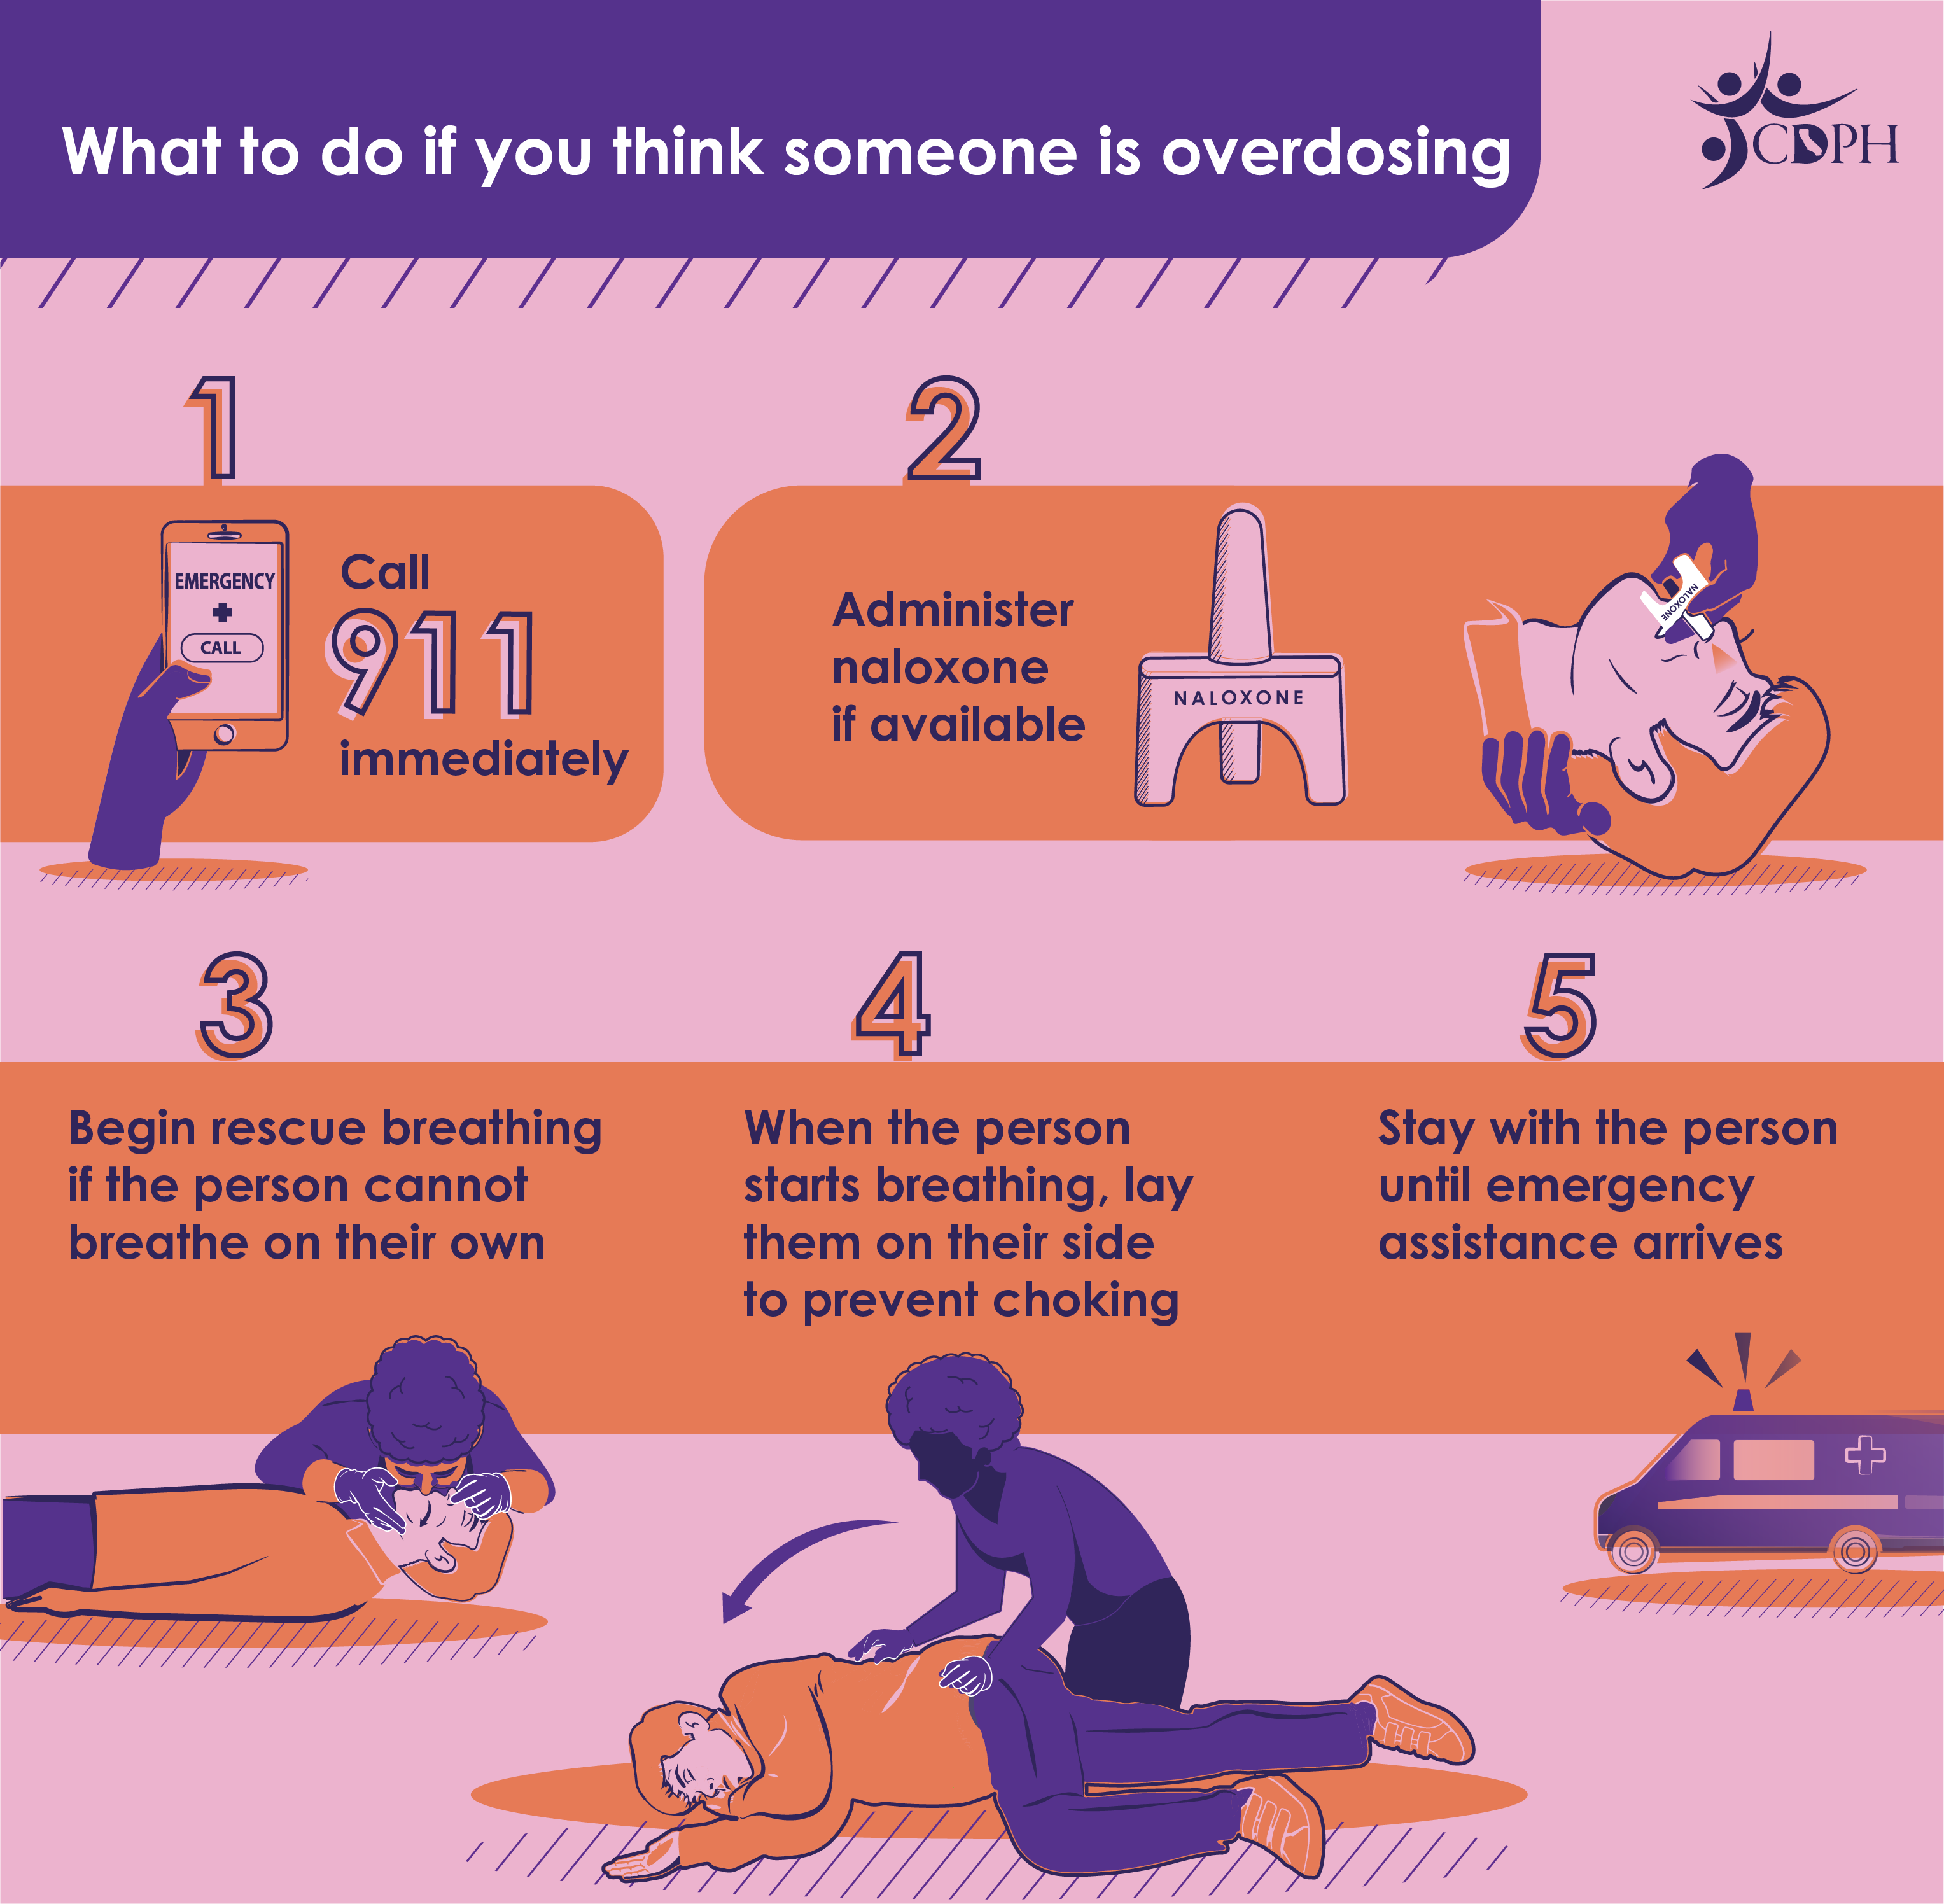 What to do if you think someone is overdosing